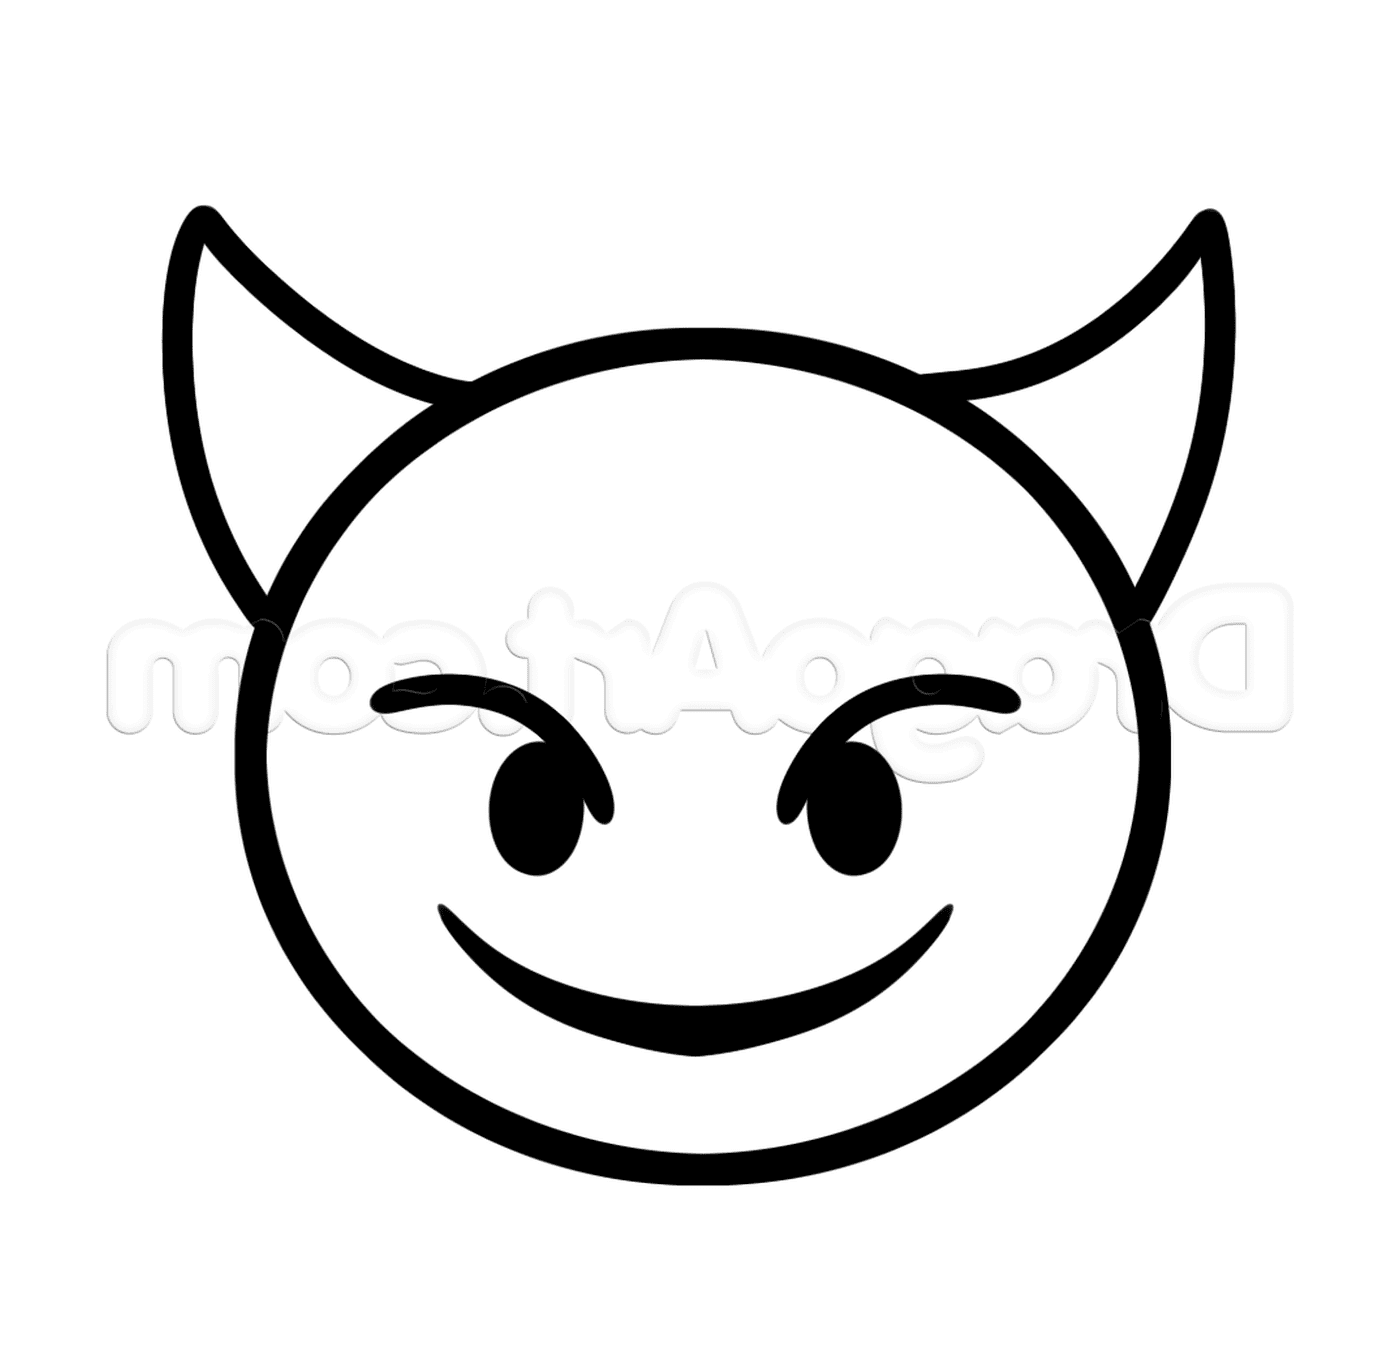  A smiling face with horns 